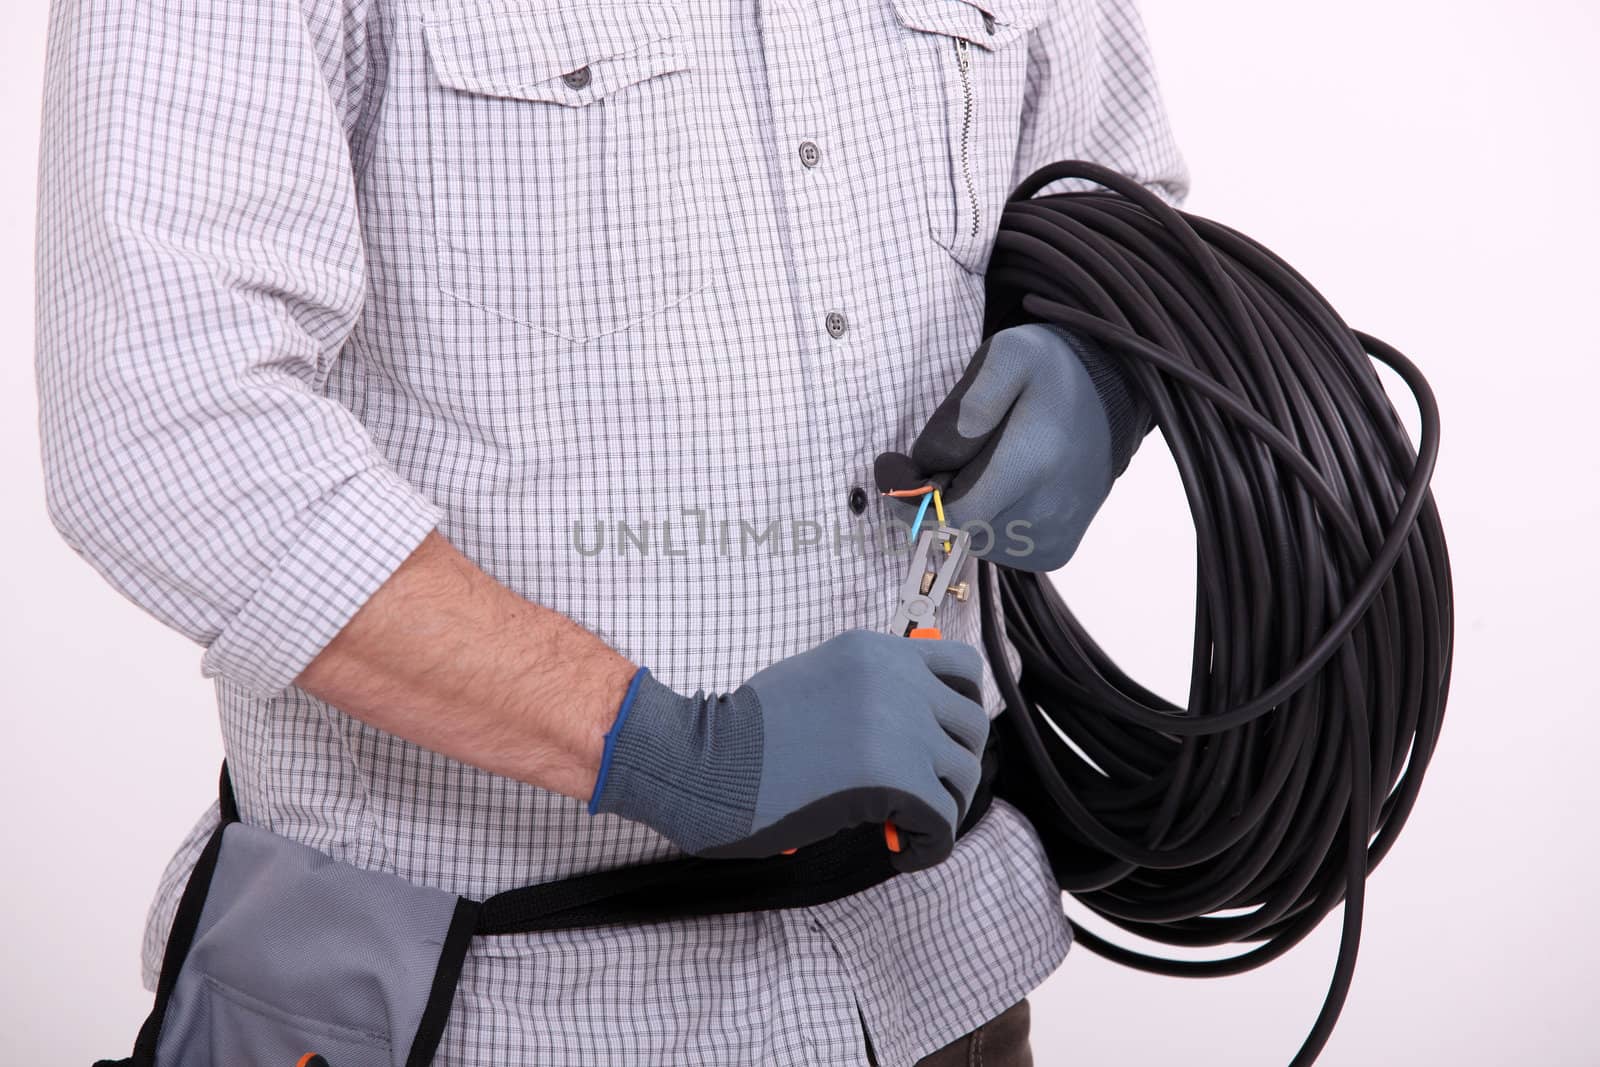 Cutting electrical wire